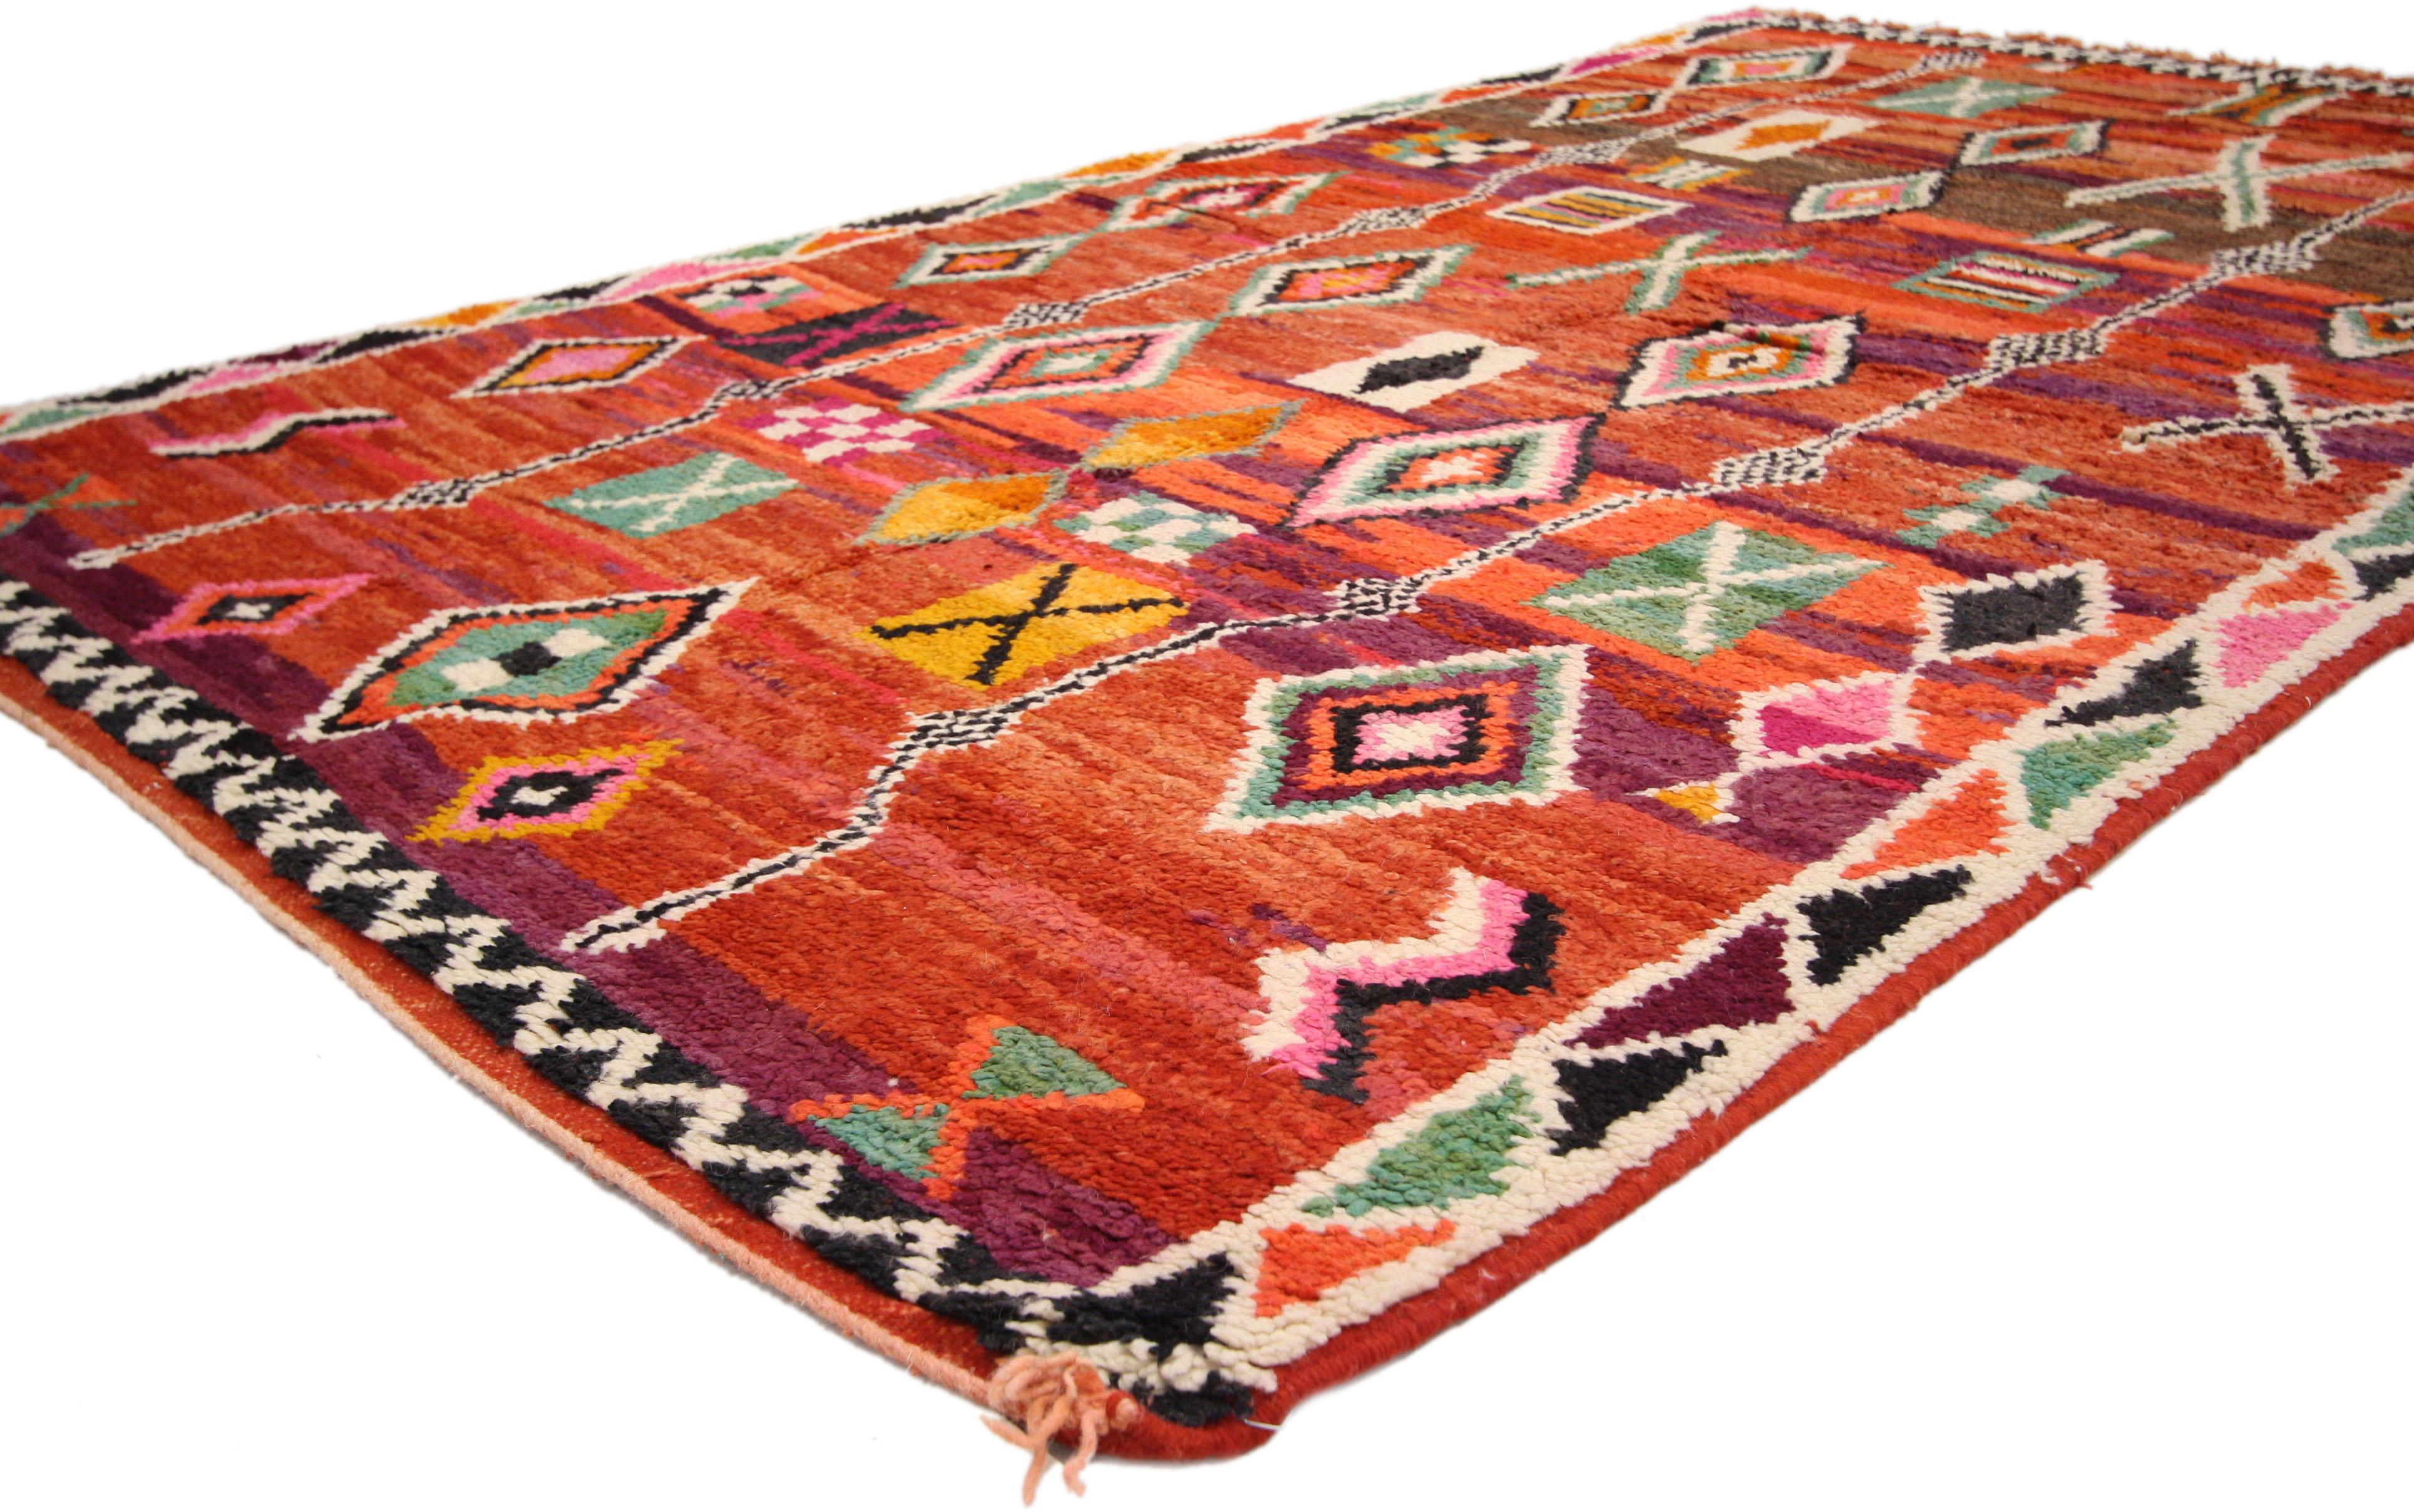 74815 Vintage Moroccan Rug with Geometric Print, Tribal Style Berber Moroccan Area Rug. This hand-knotted wool vintage Berber Moroccan rug evokes imagery of power and majesty. Animated with Berber tribe motifs and secondary protection symbols, from